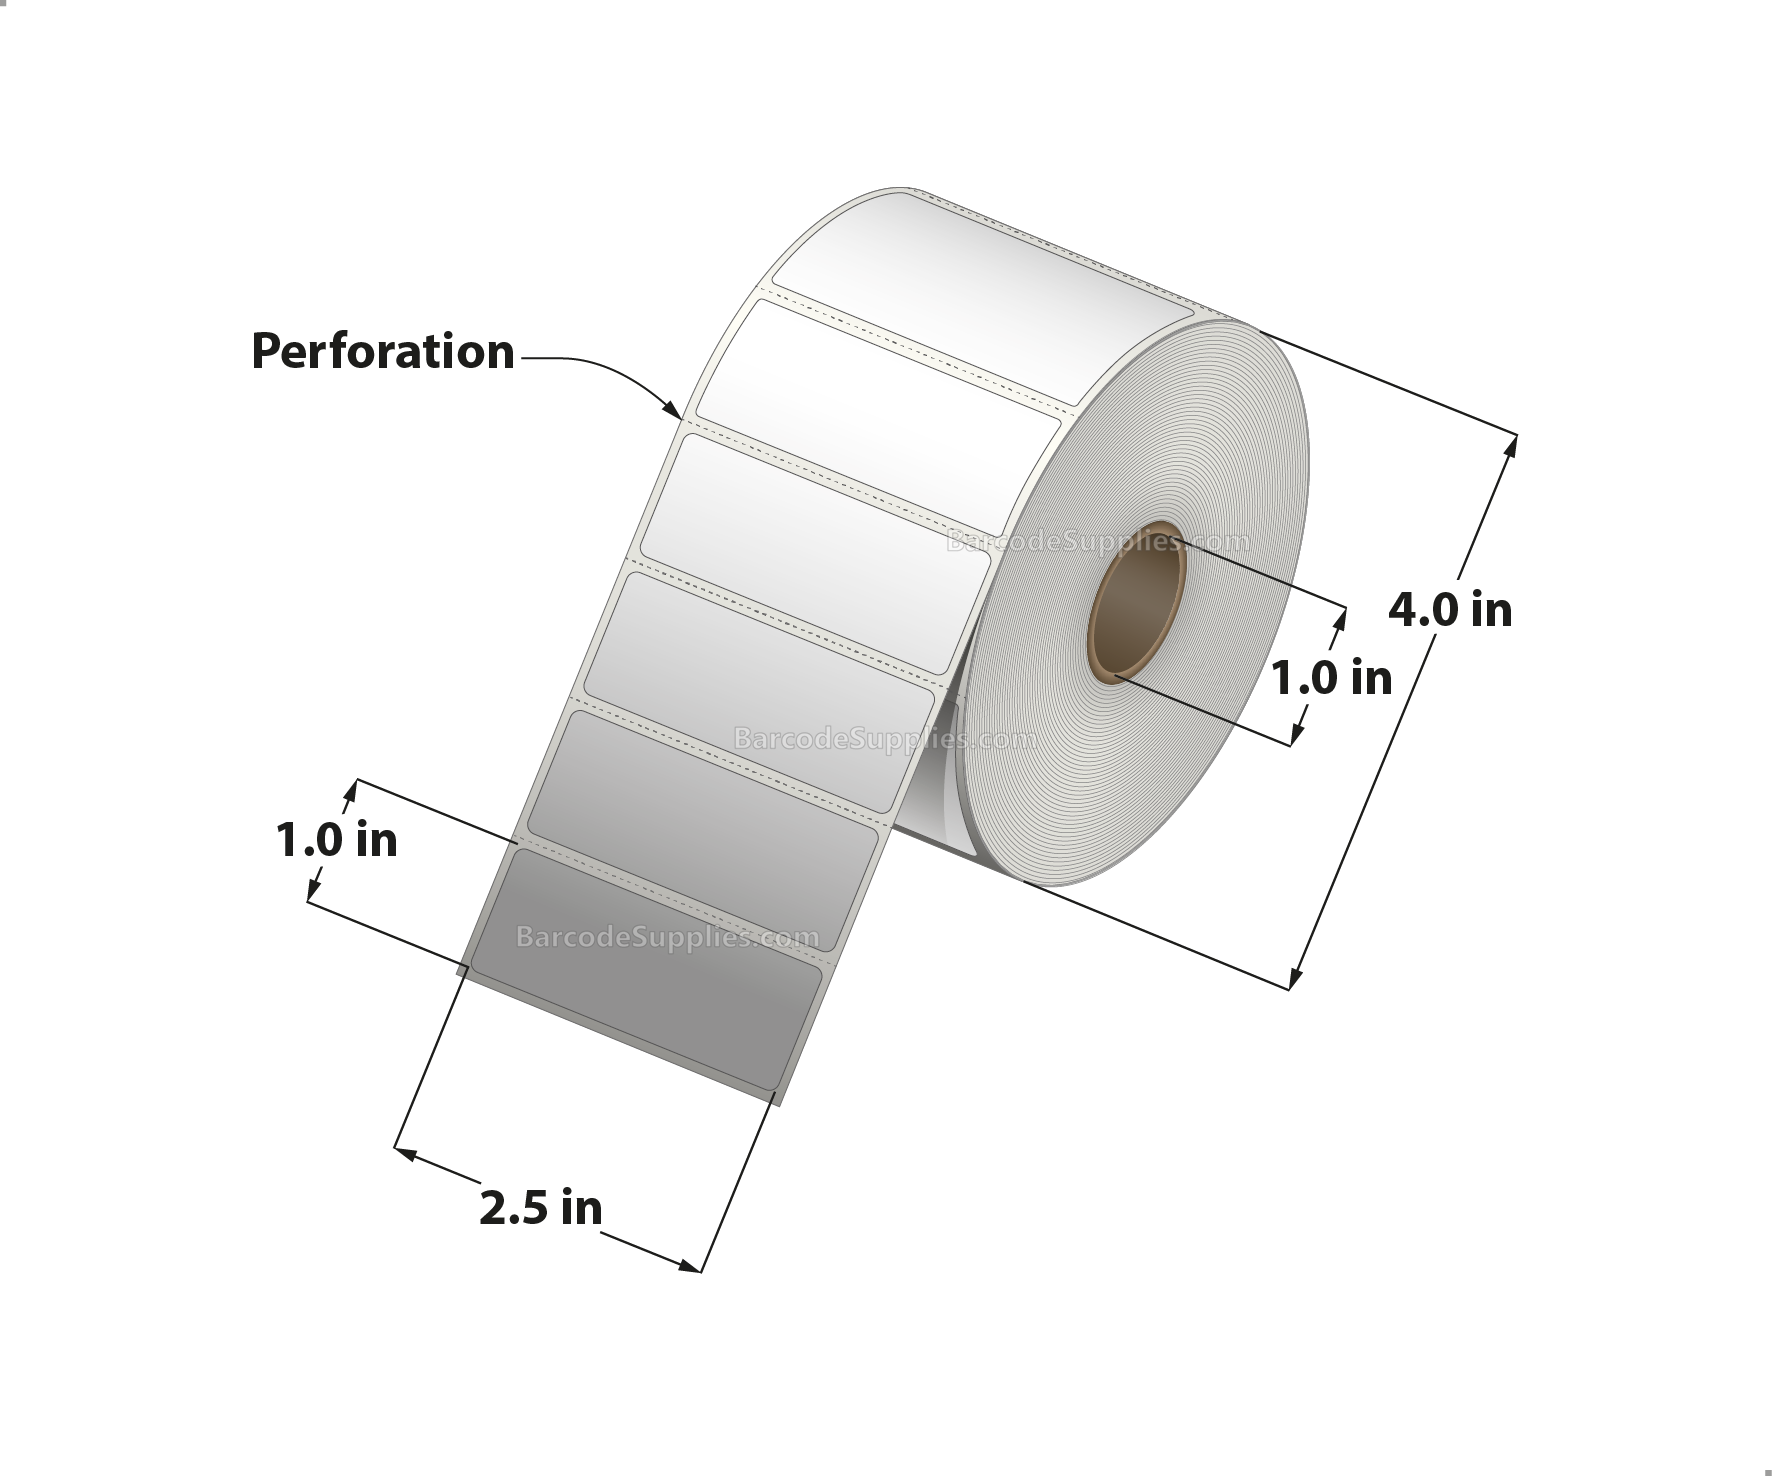 2.5 x 1 Direct Thermal White Labels With Acrylic Adhesive - Perforated - 1375 Labels Per Roll - Carton Of 12 Rolls - 16500 Labels Total - MPN: RD-25-1-1375-1